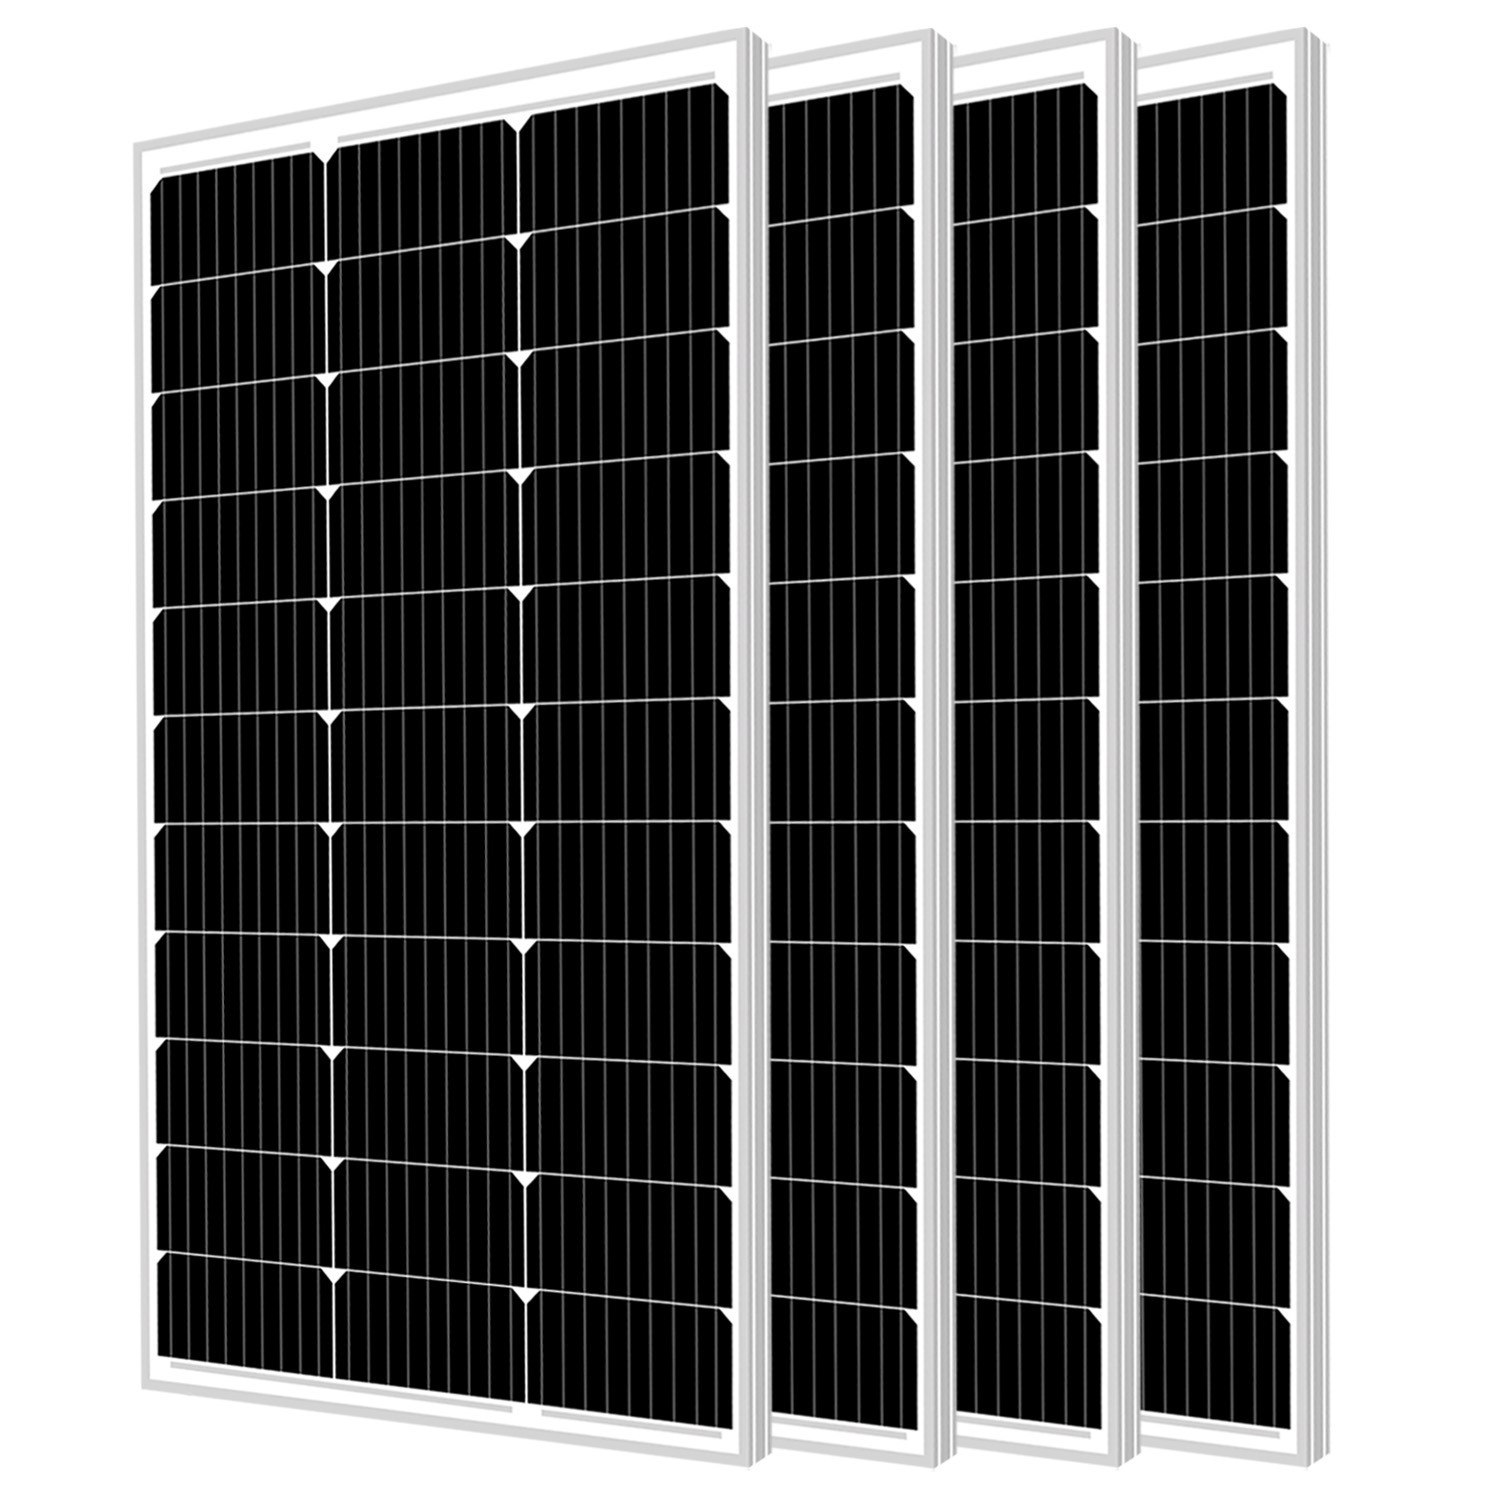 100W Solar Panel 12V Mono Off Grid Battery Charger for High-Efficiency Boats Car - 4 Pack